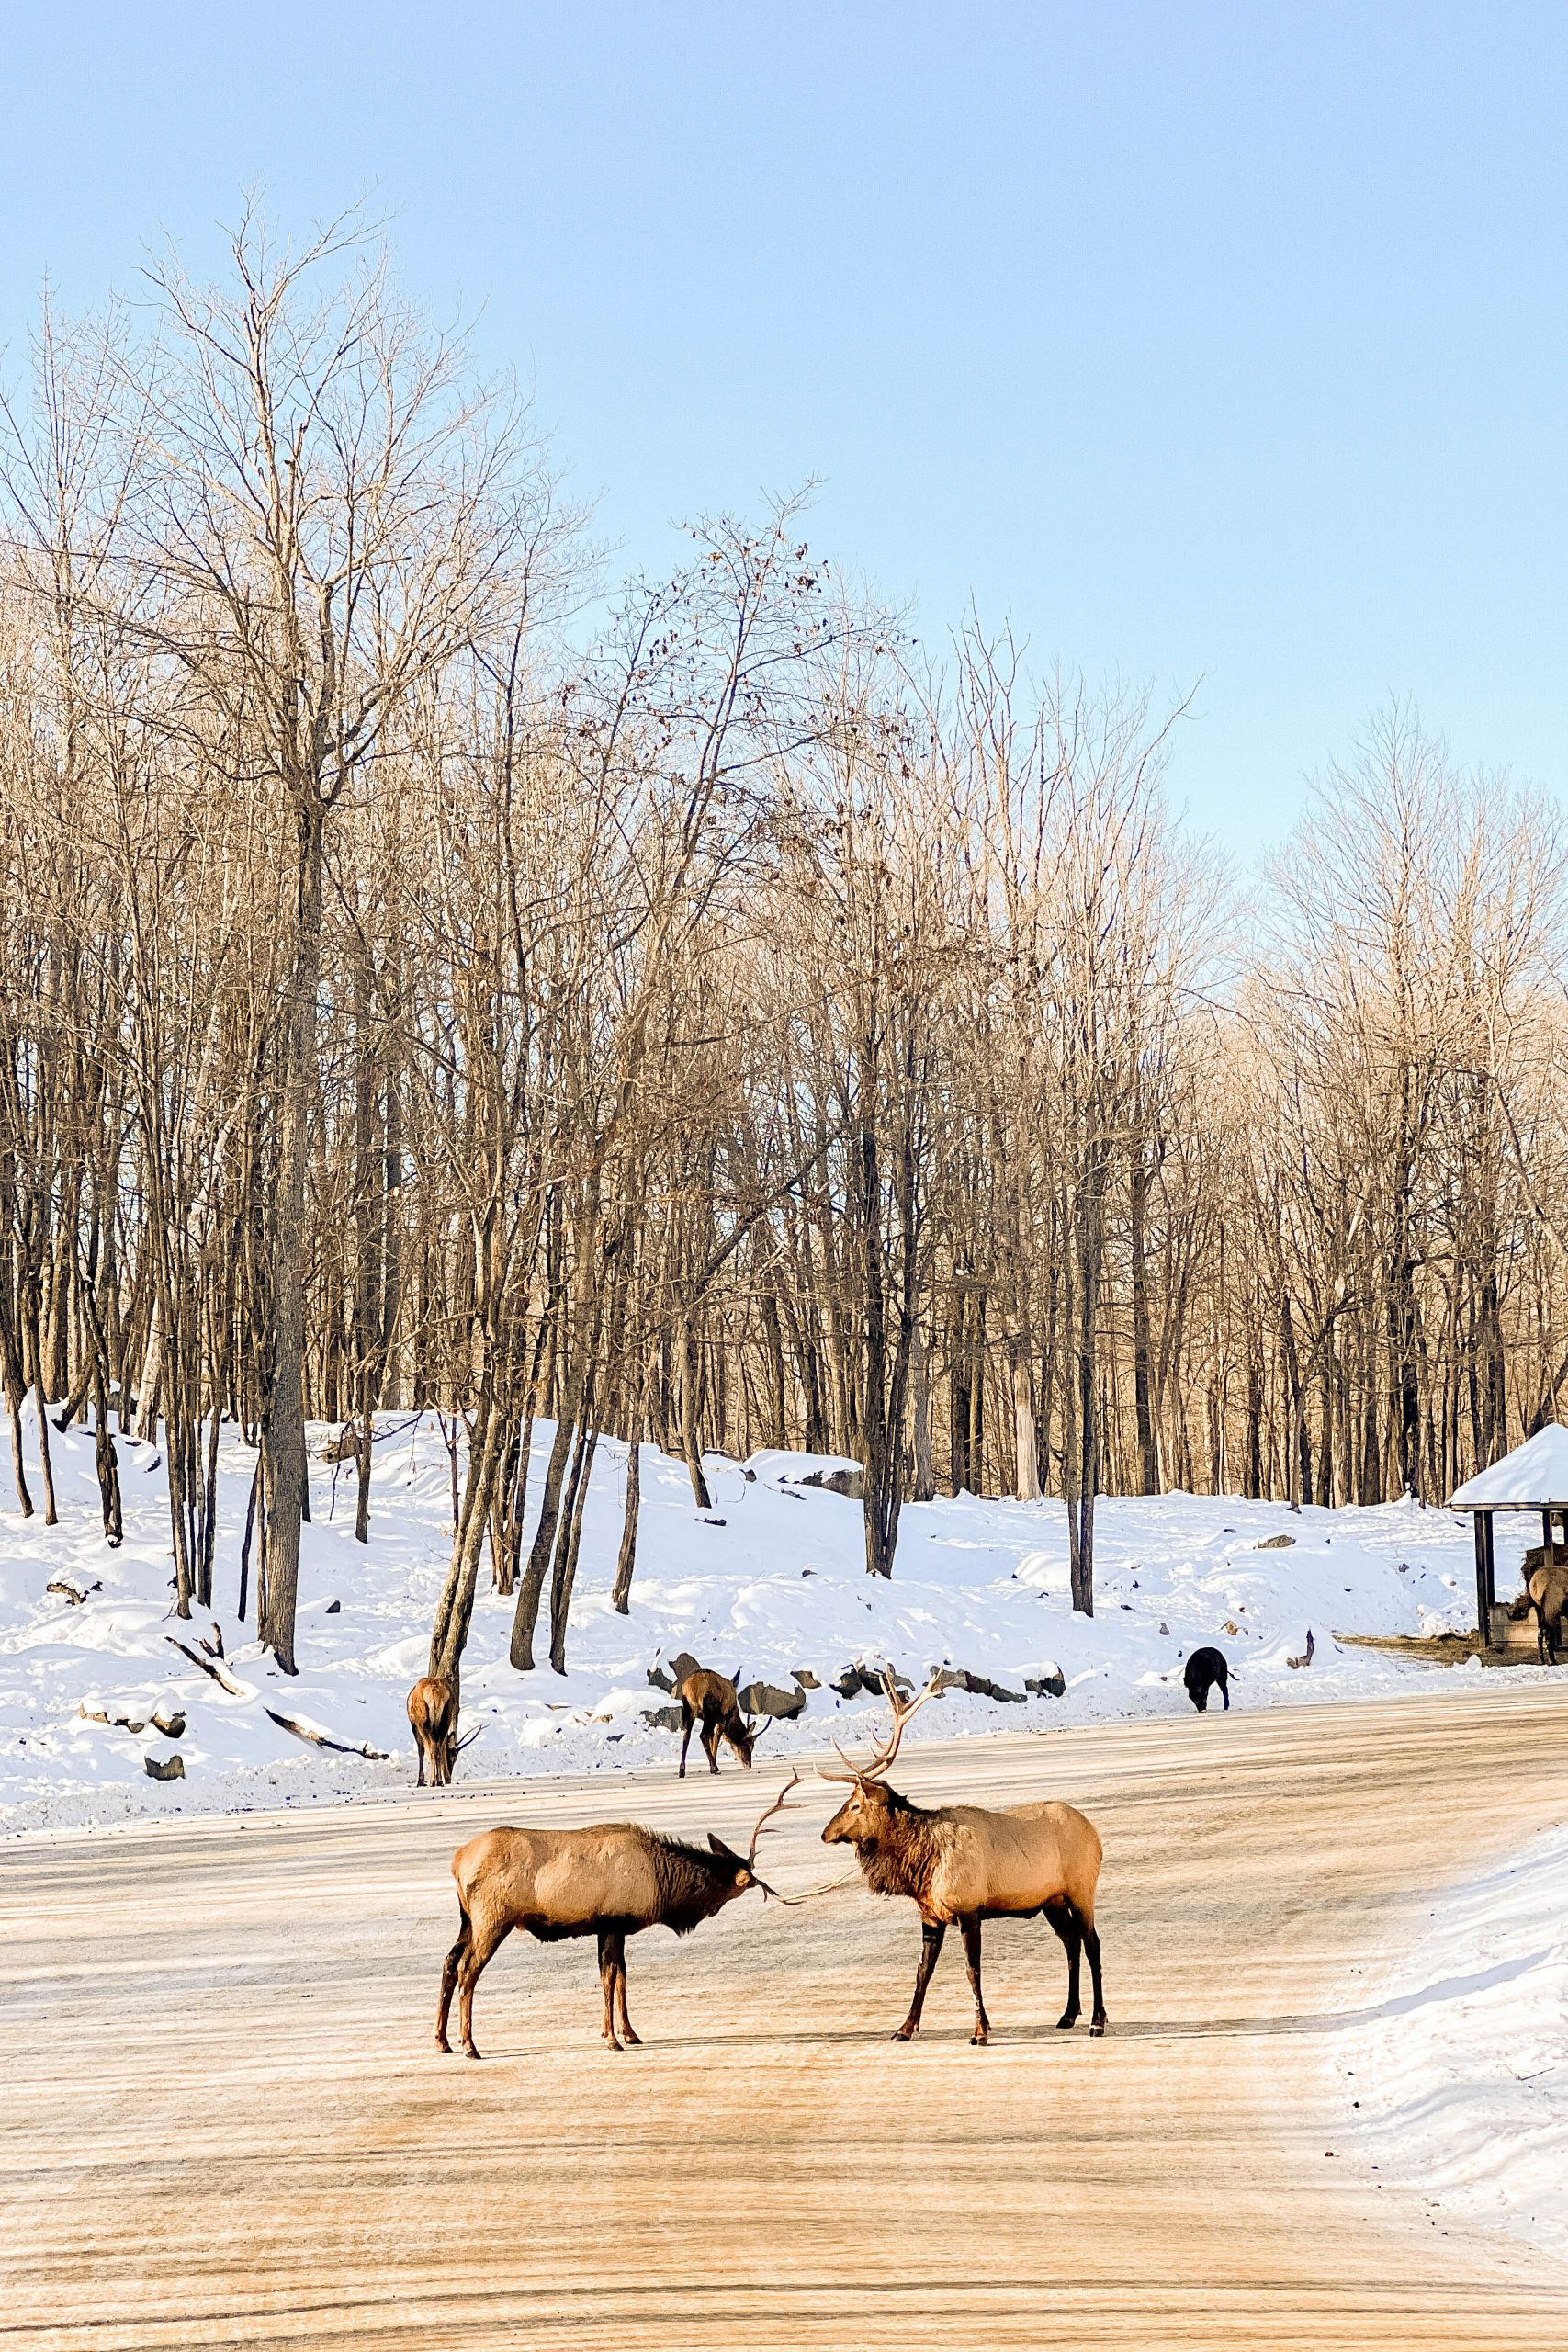 It’s time for a winter mini vacation! Our wintery escape to Montebello, Quebec was absolutely fabulous - from staying at the Fairmont Le Château Montebello to visiting our furry friends at Parc Omega. Join our family on our latest adventure!